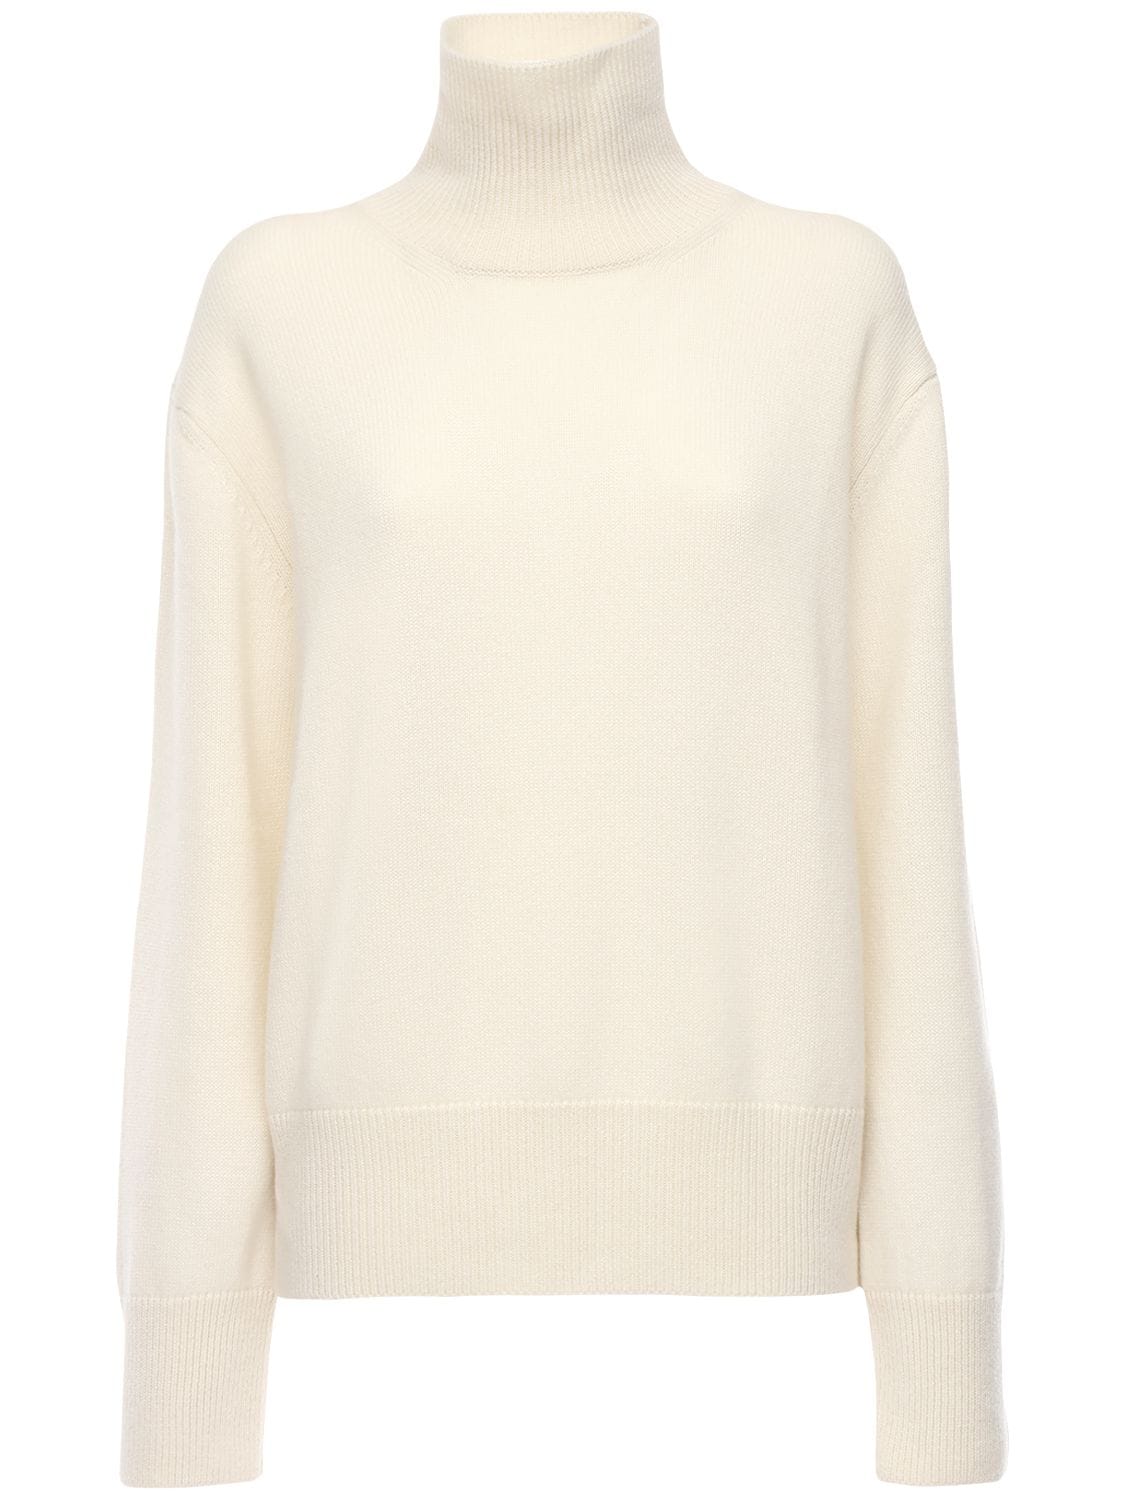 Ag Cashmere Knit Turtleneck Sweater In Ivory